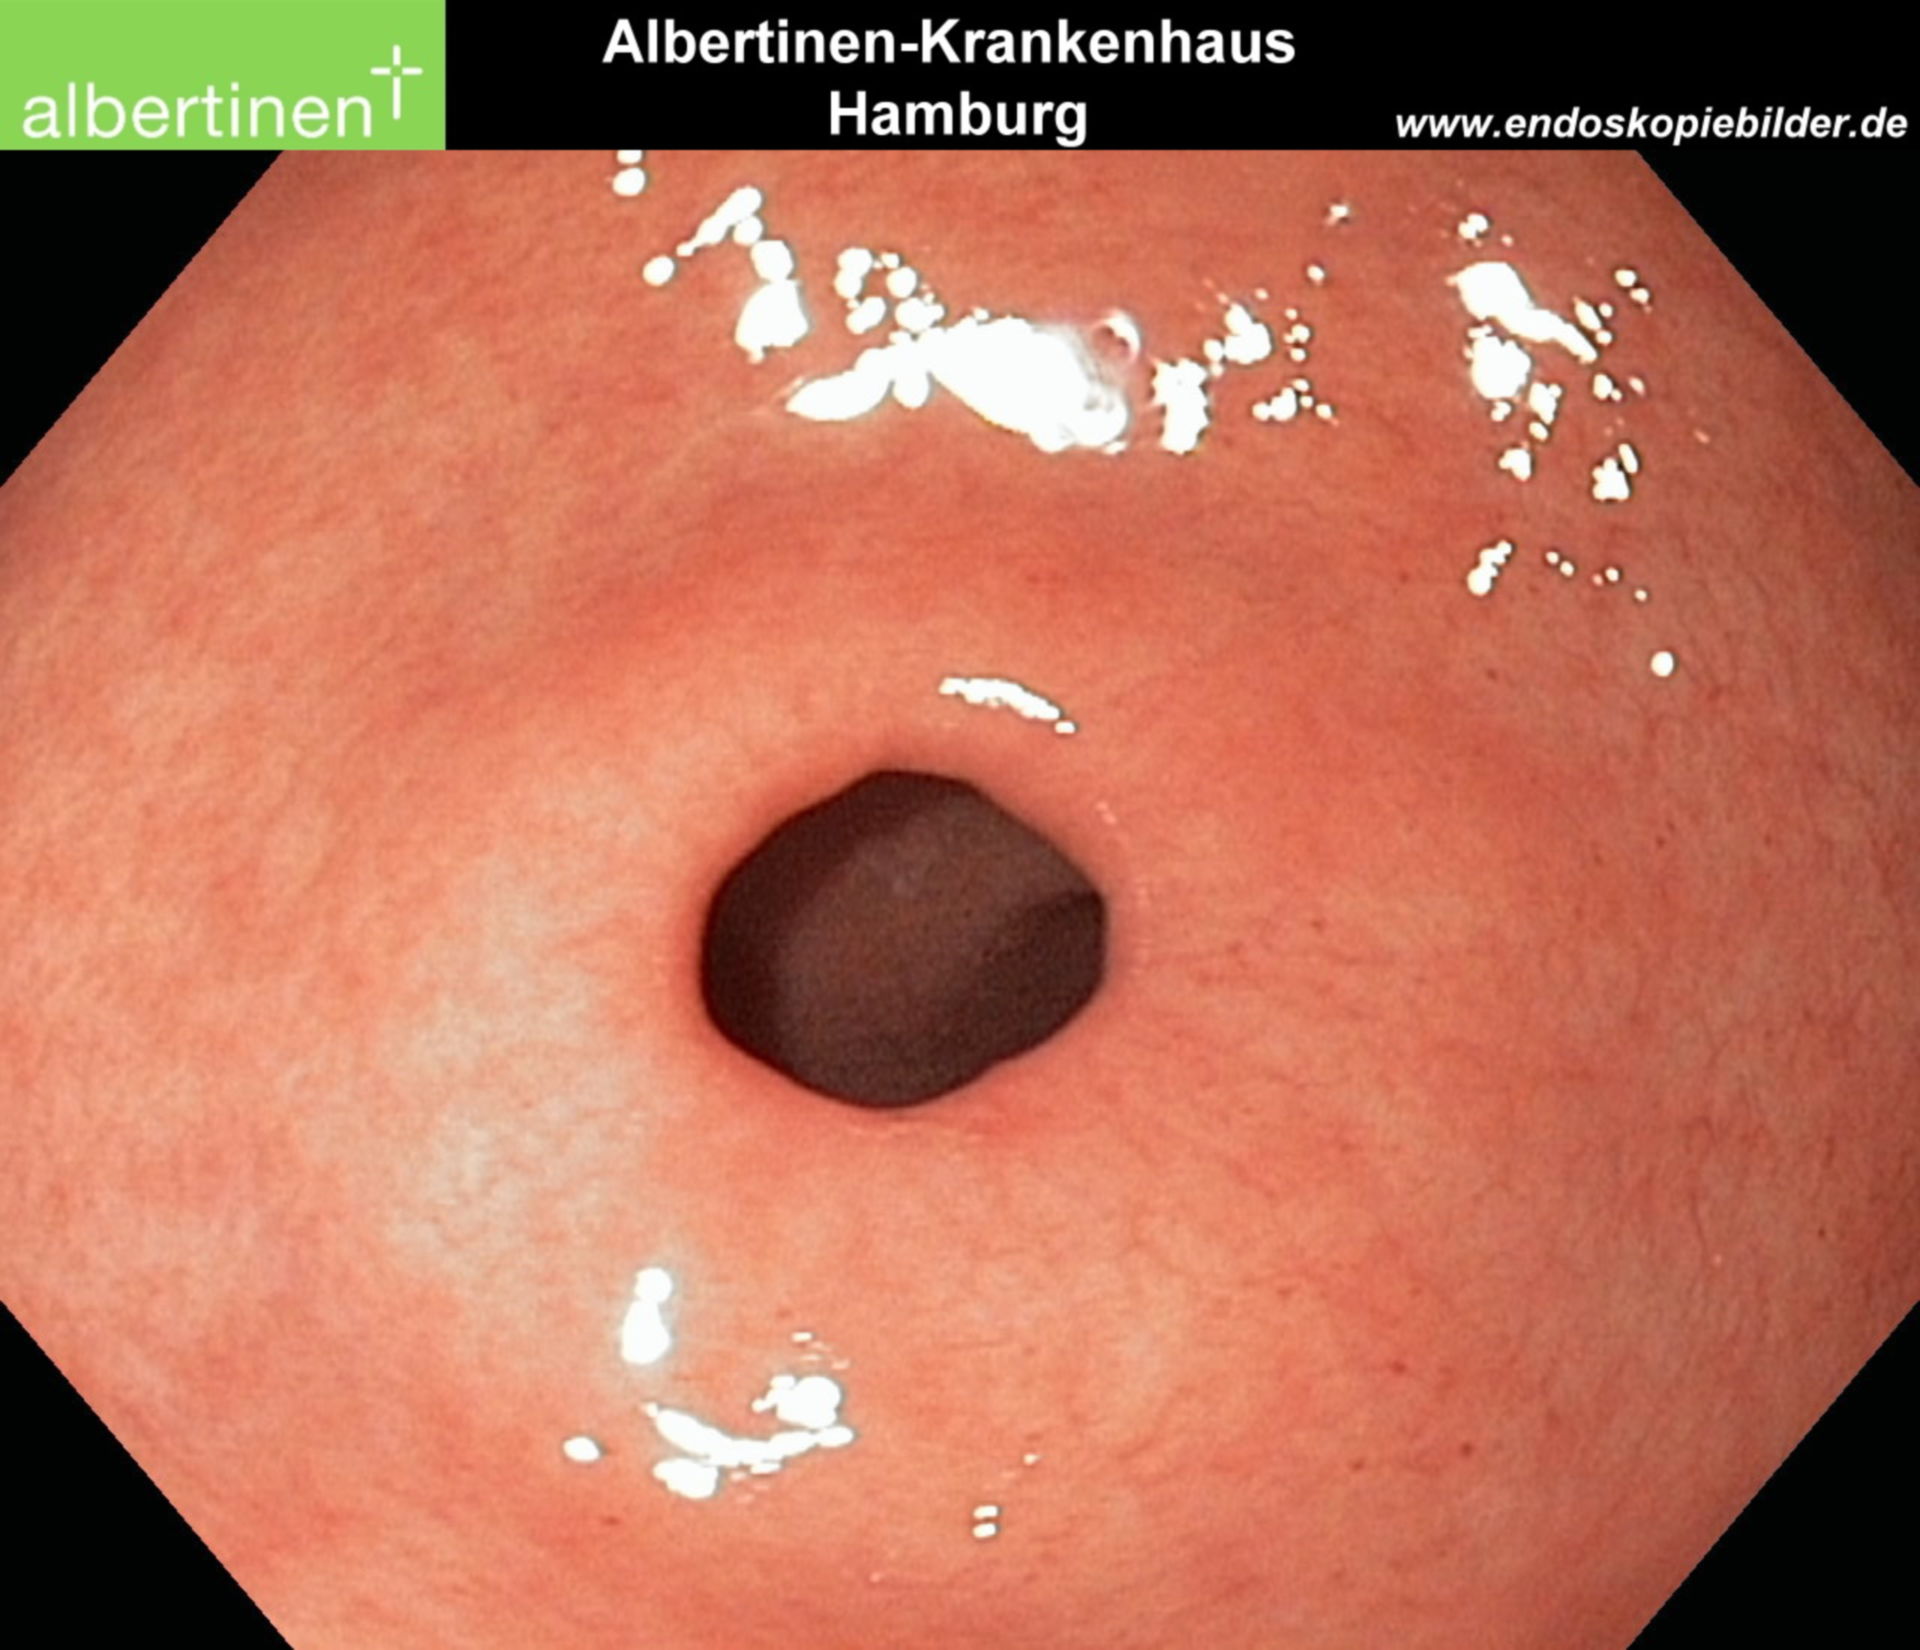 Endoscopy: Pylorus of the stomach, normal finding